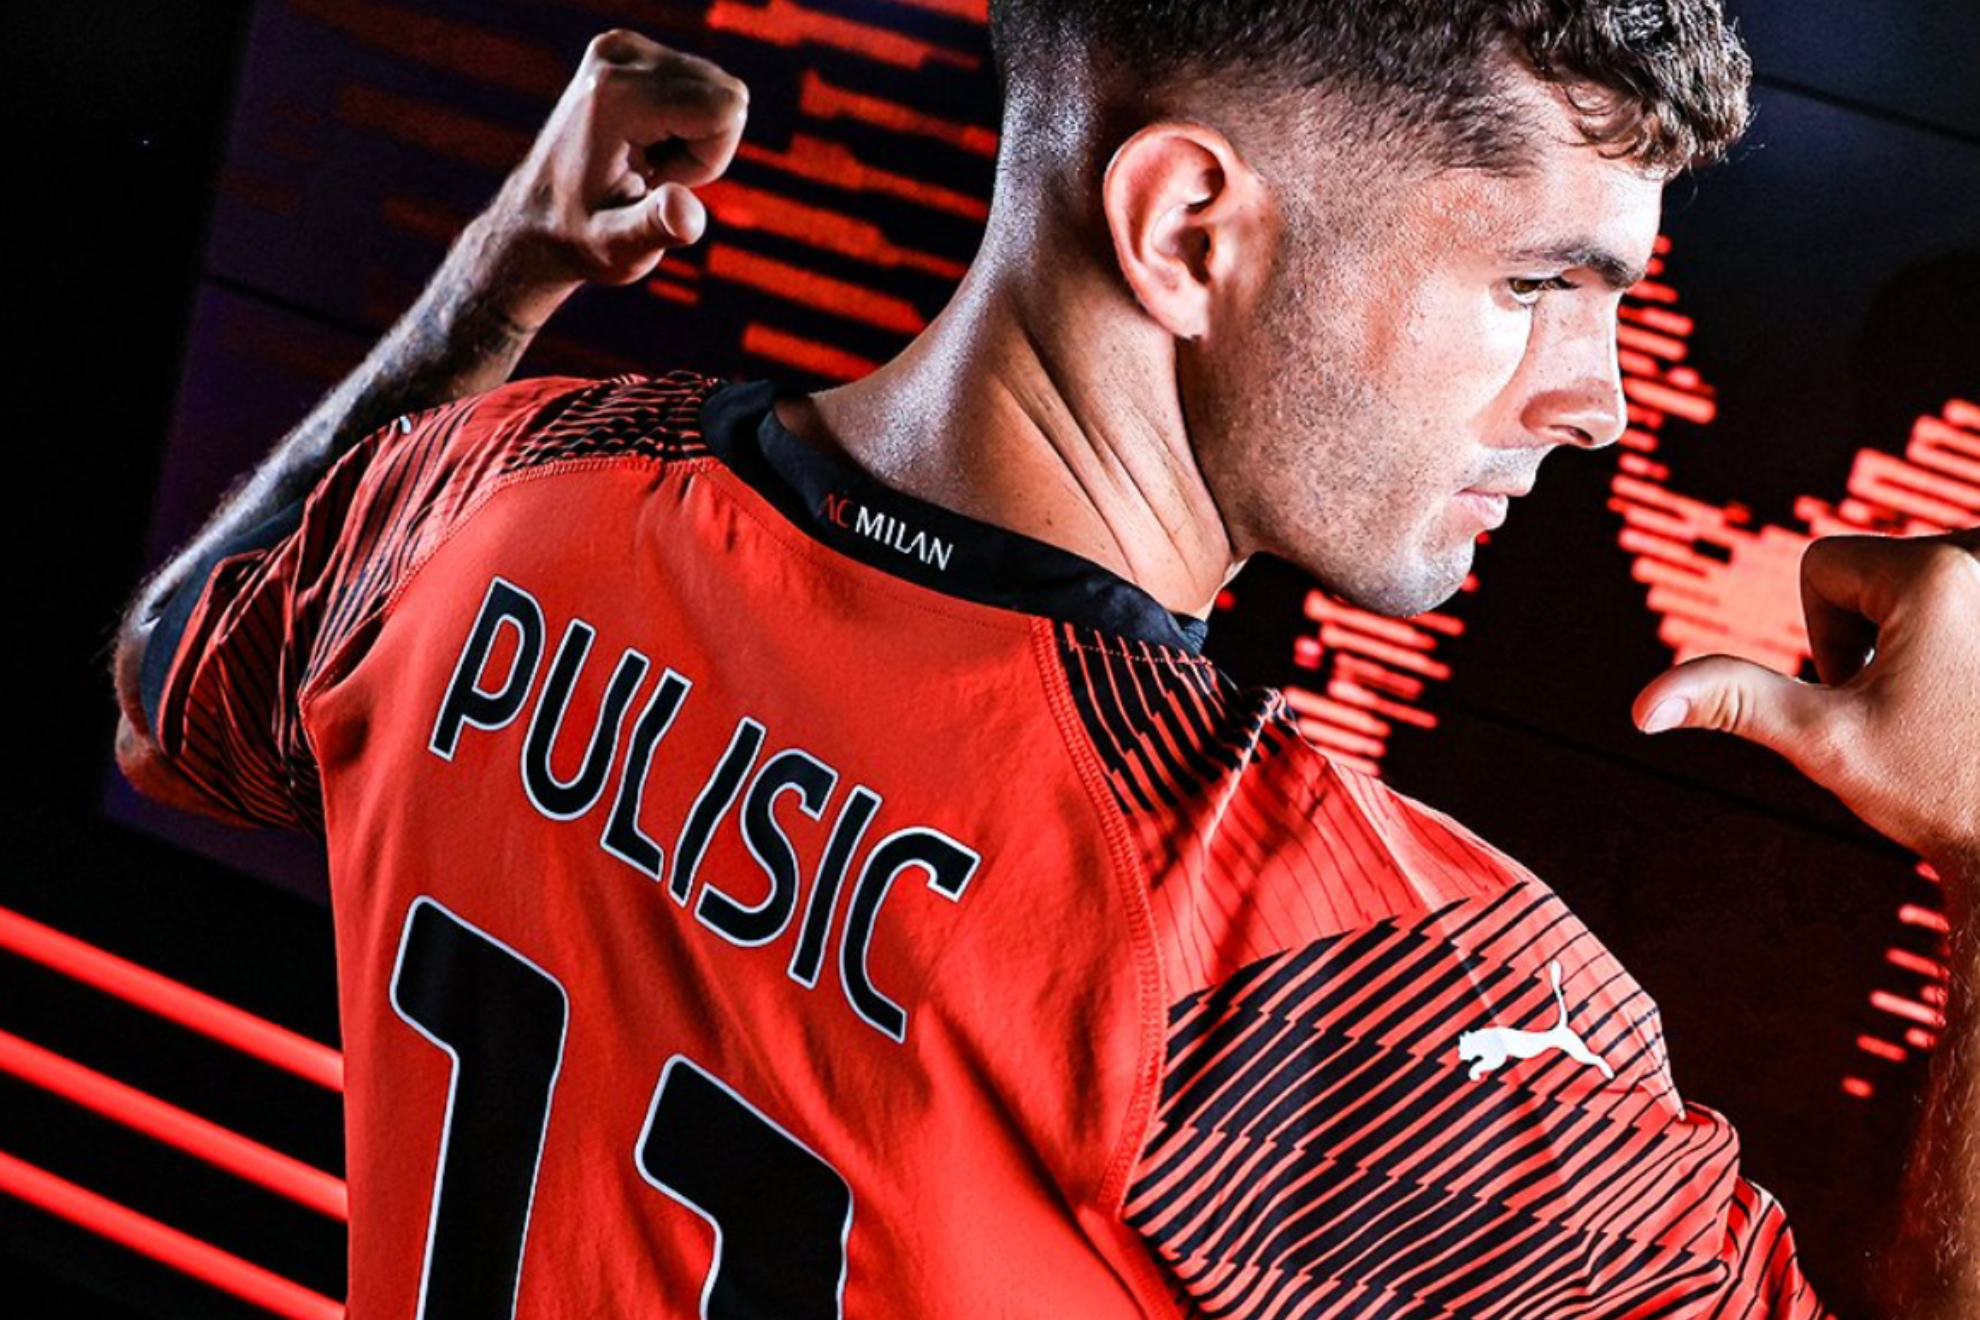 Serie A: Christian Pulisic introduced at Milan -- and clears up